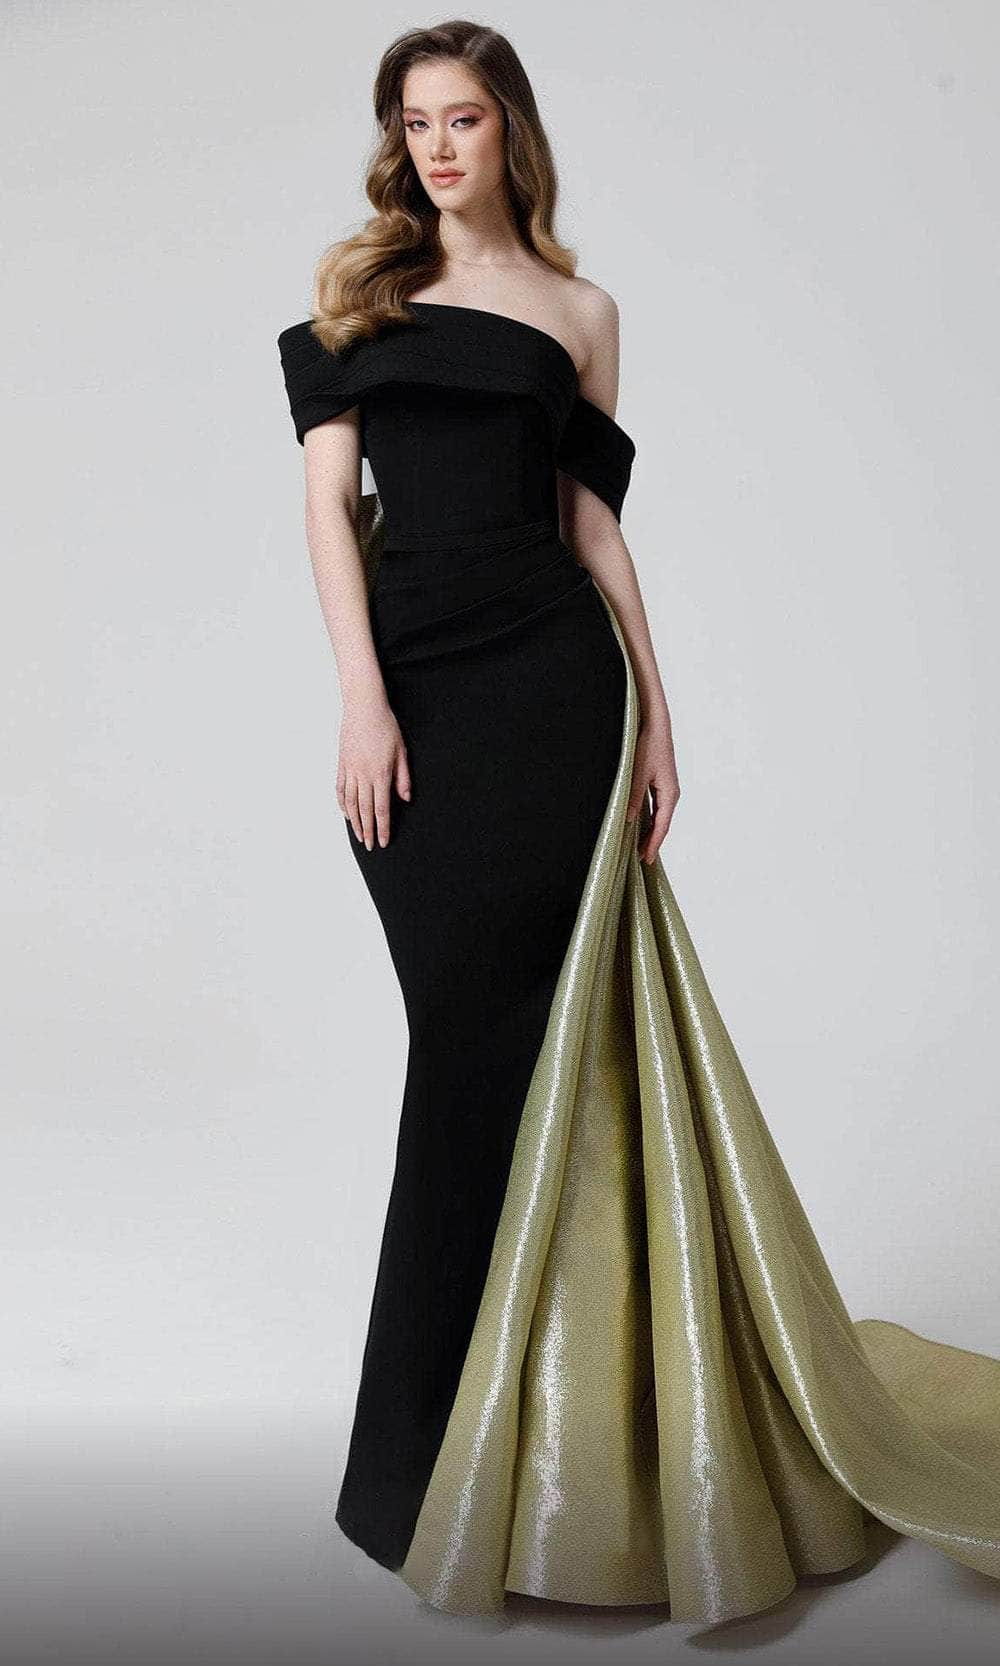 MNM COUTURE N0466 - Off Shoulder Asymmetric Evening Gown Evening Dresses 4 / Black/Gold